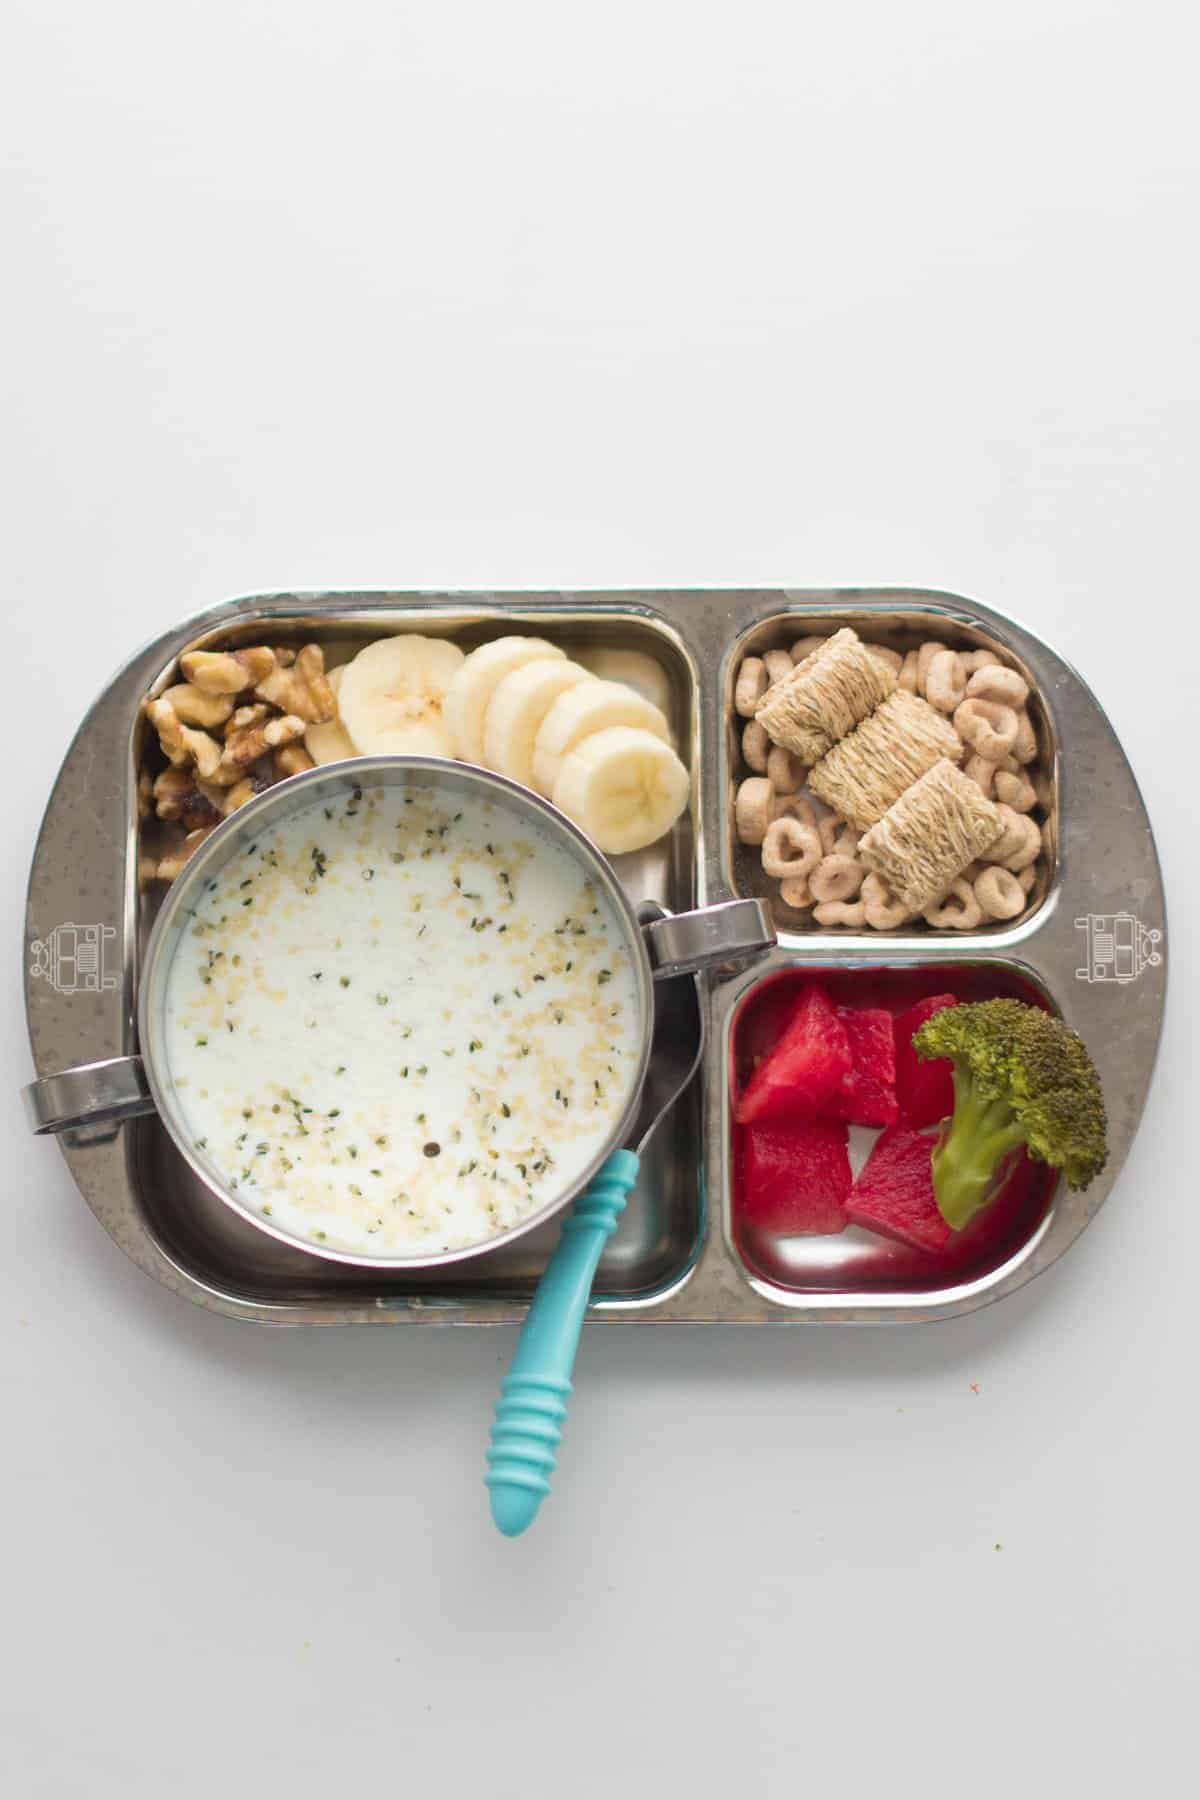 milk in a stainless steel bowl along with sliced bananas, walnuts, cereal, watermelon, and broccoli on a stainless steel plate.